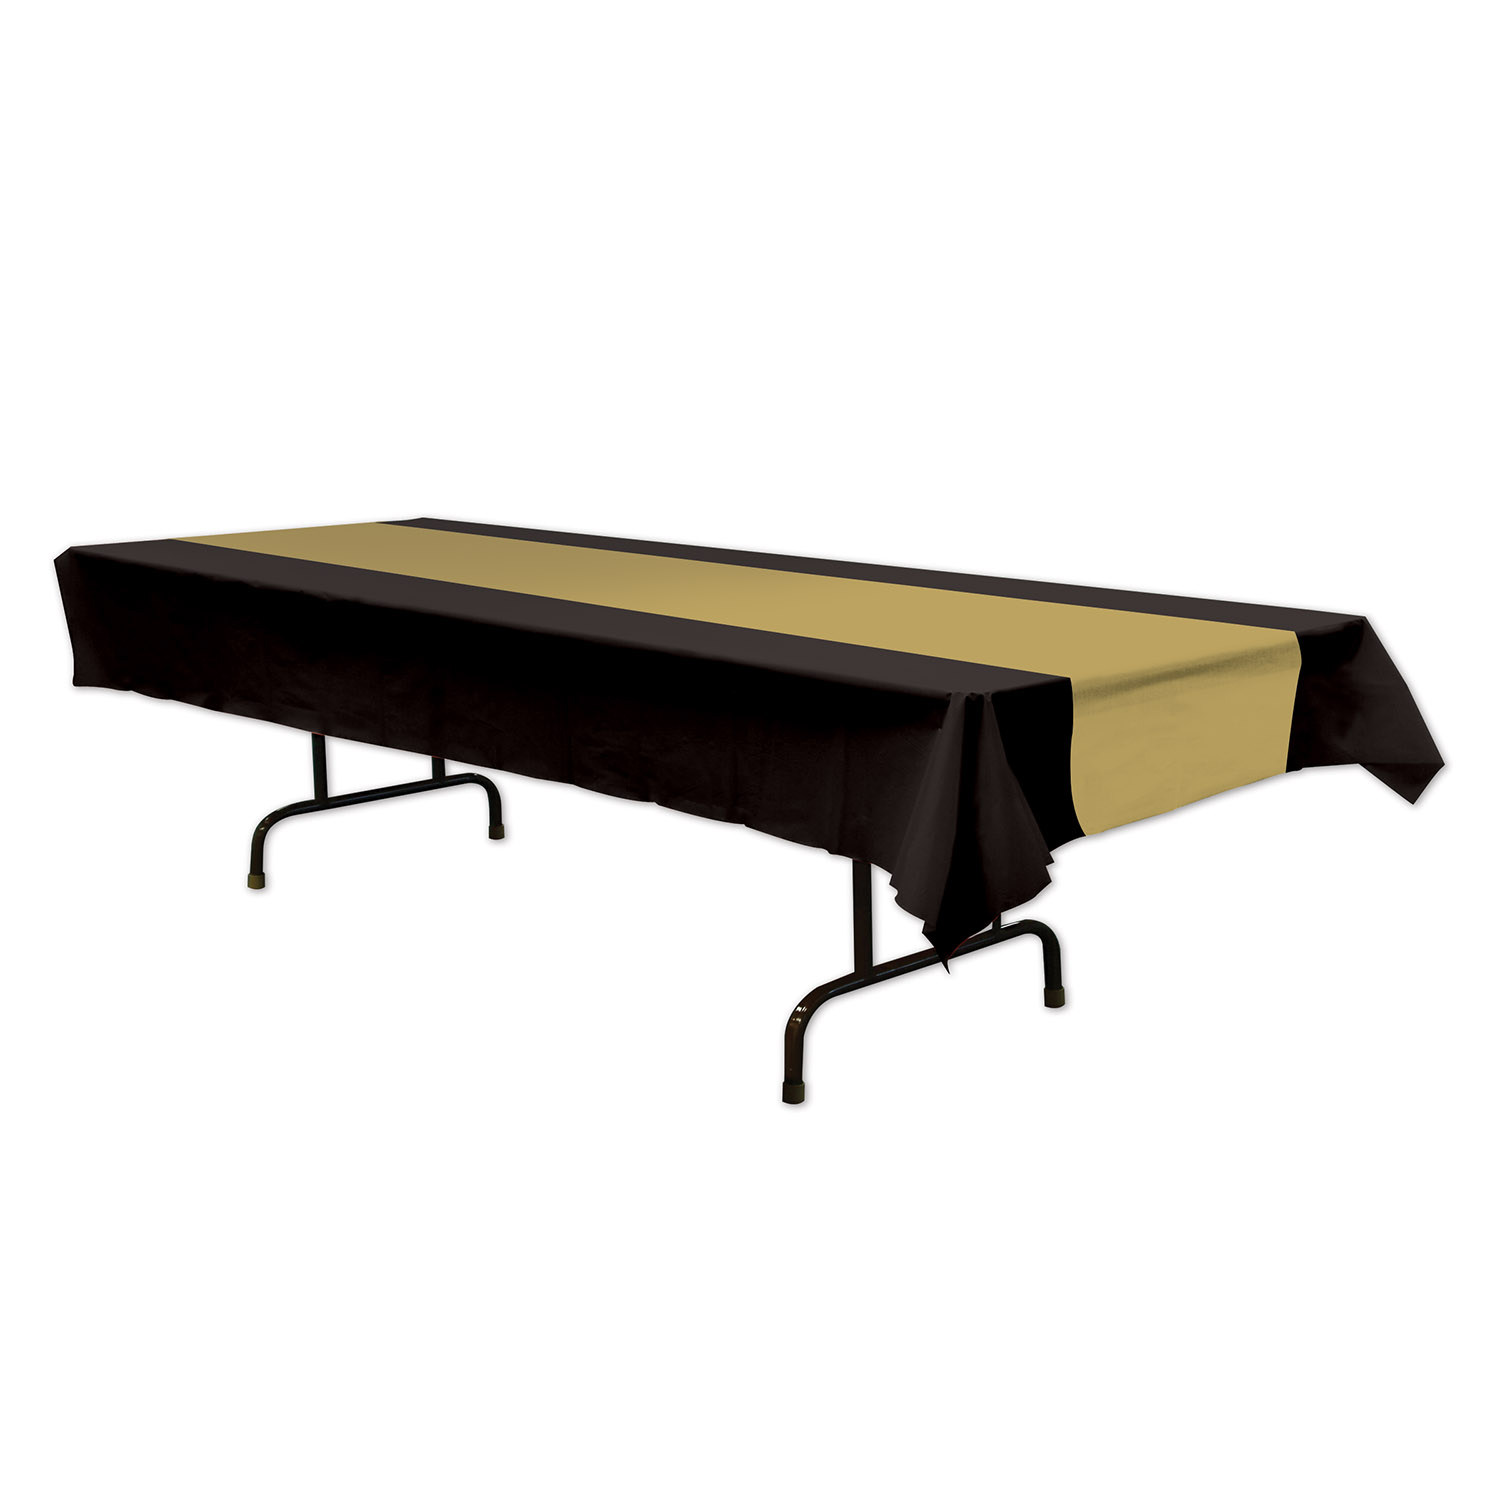 Black with gold center table cover for rectangular table.